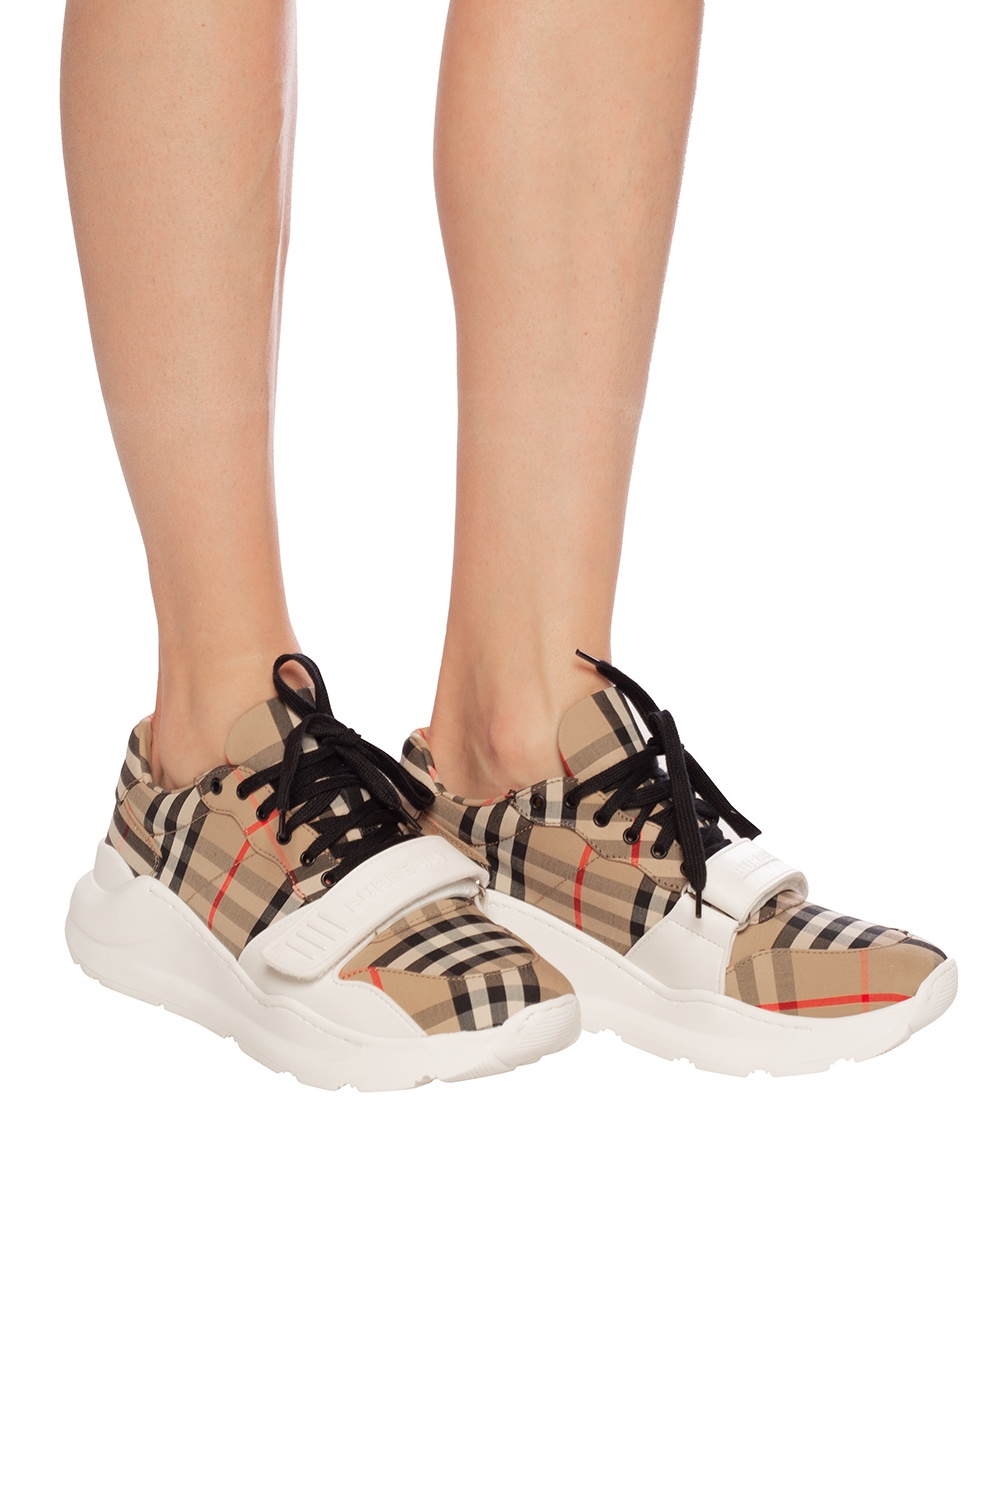 Burberry Lace-up sneakers | Women's Shoes | Vitkac